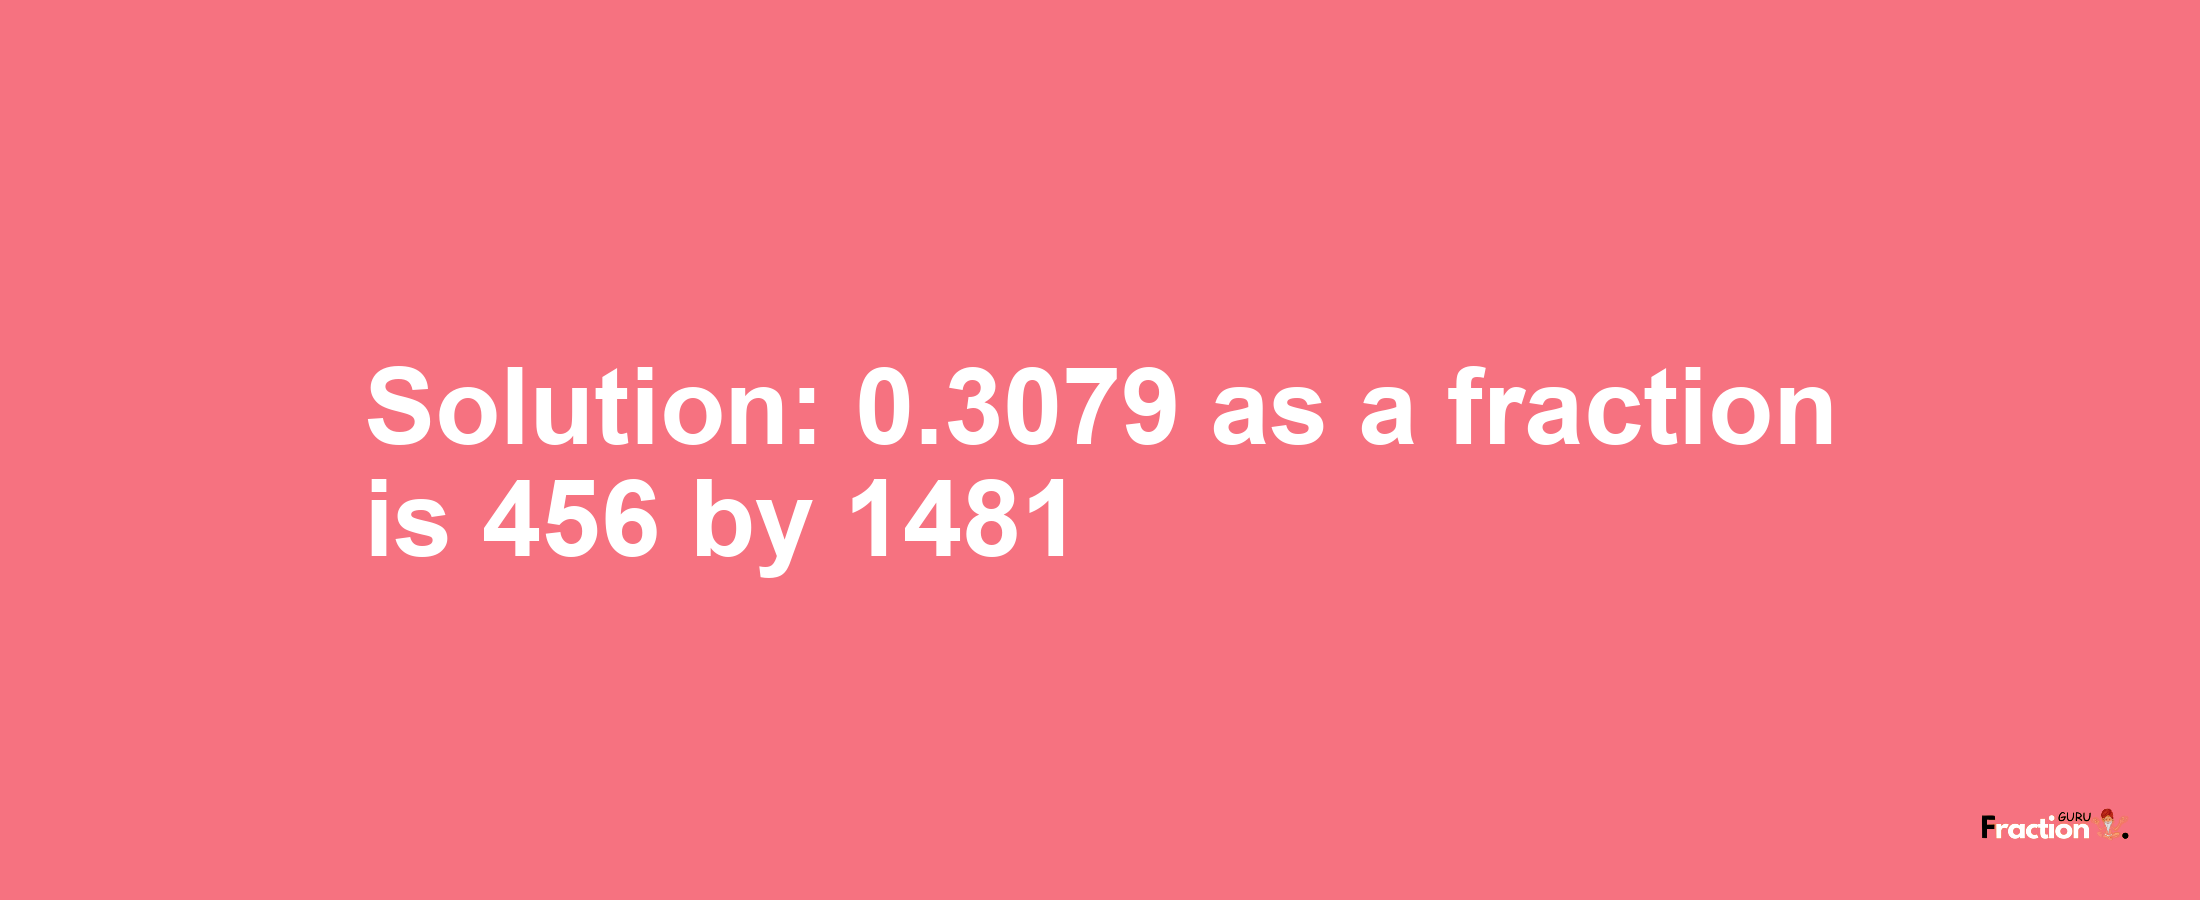 Solution:0.3079 as a fraction is 456/1481